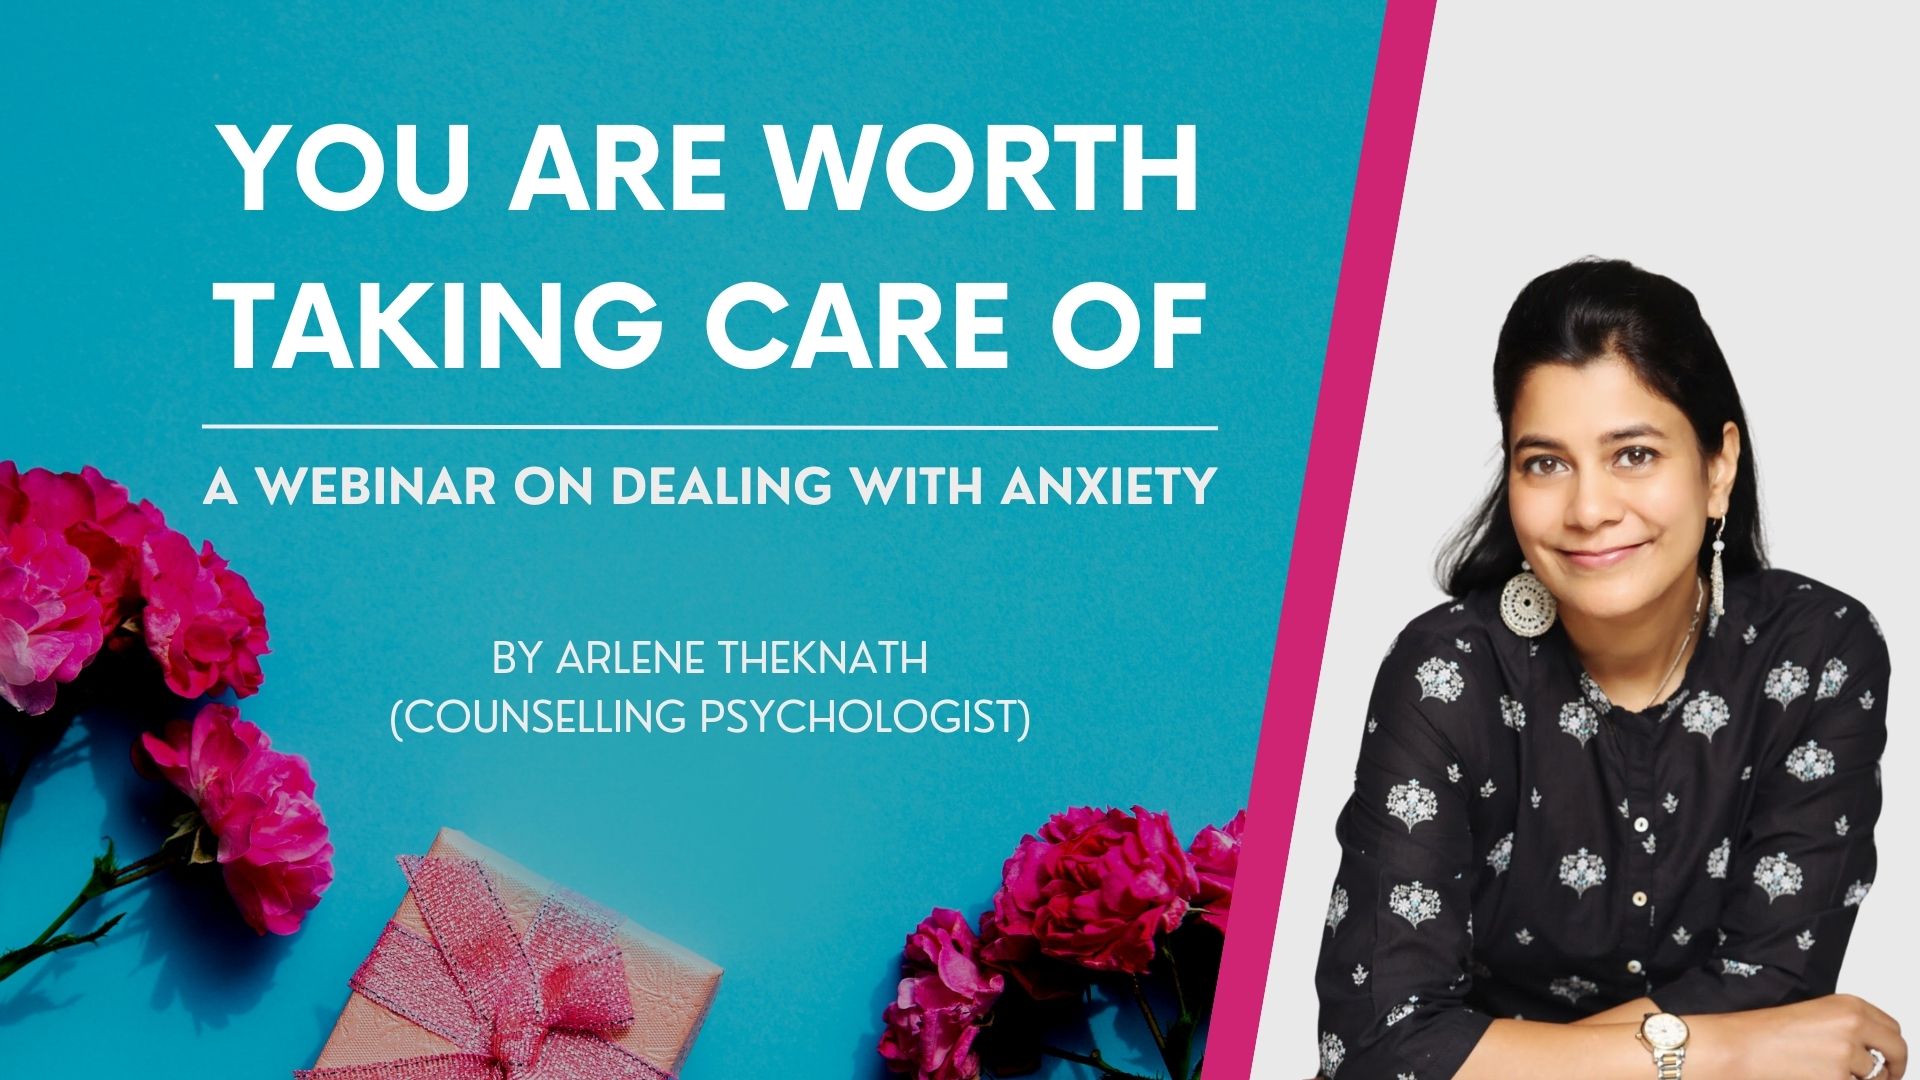 Dealing With Anxiety - Arlene Theknath (Counselling Psychologist) | Webinar by WellSpring Women